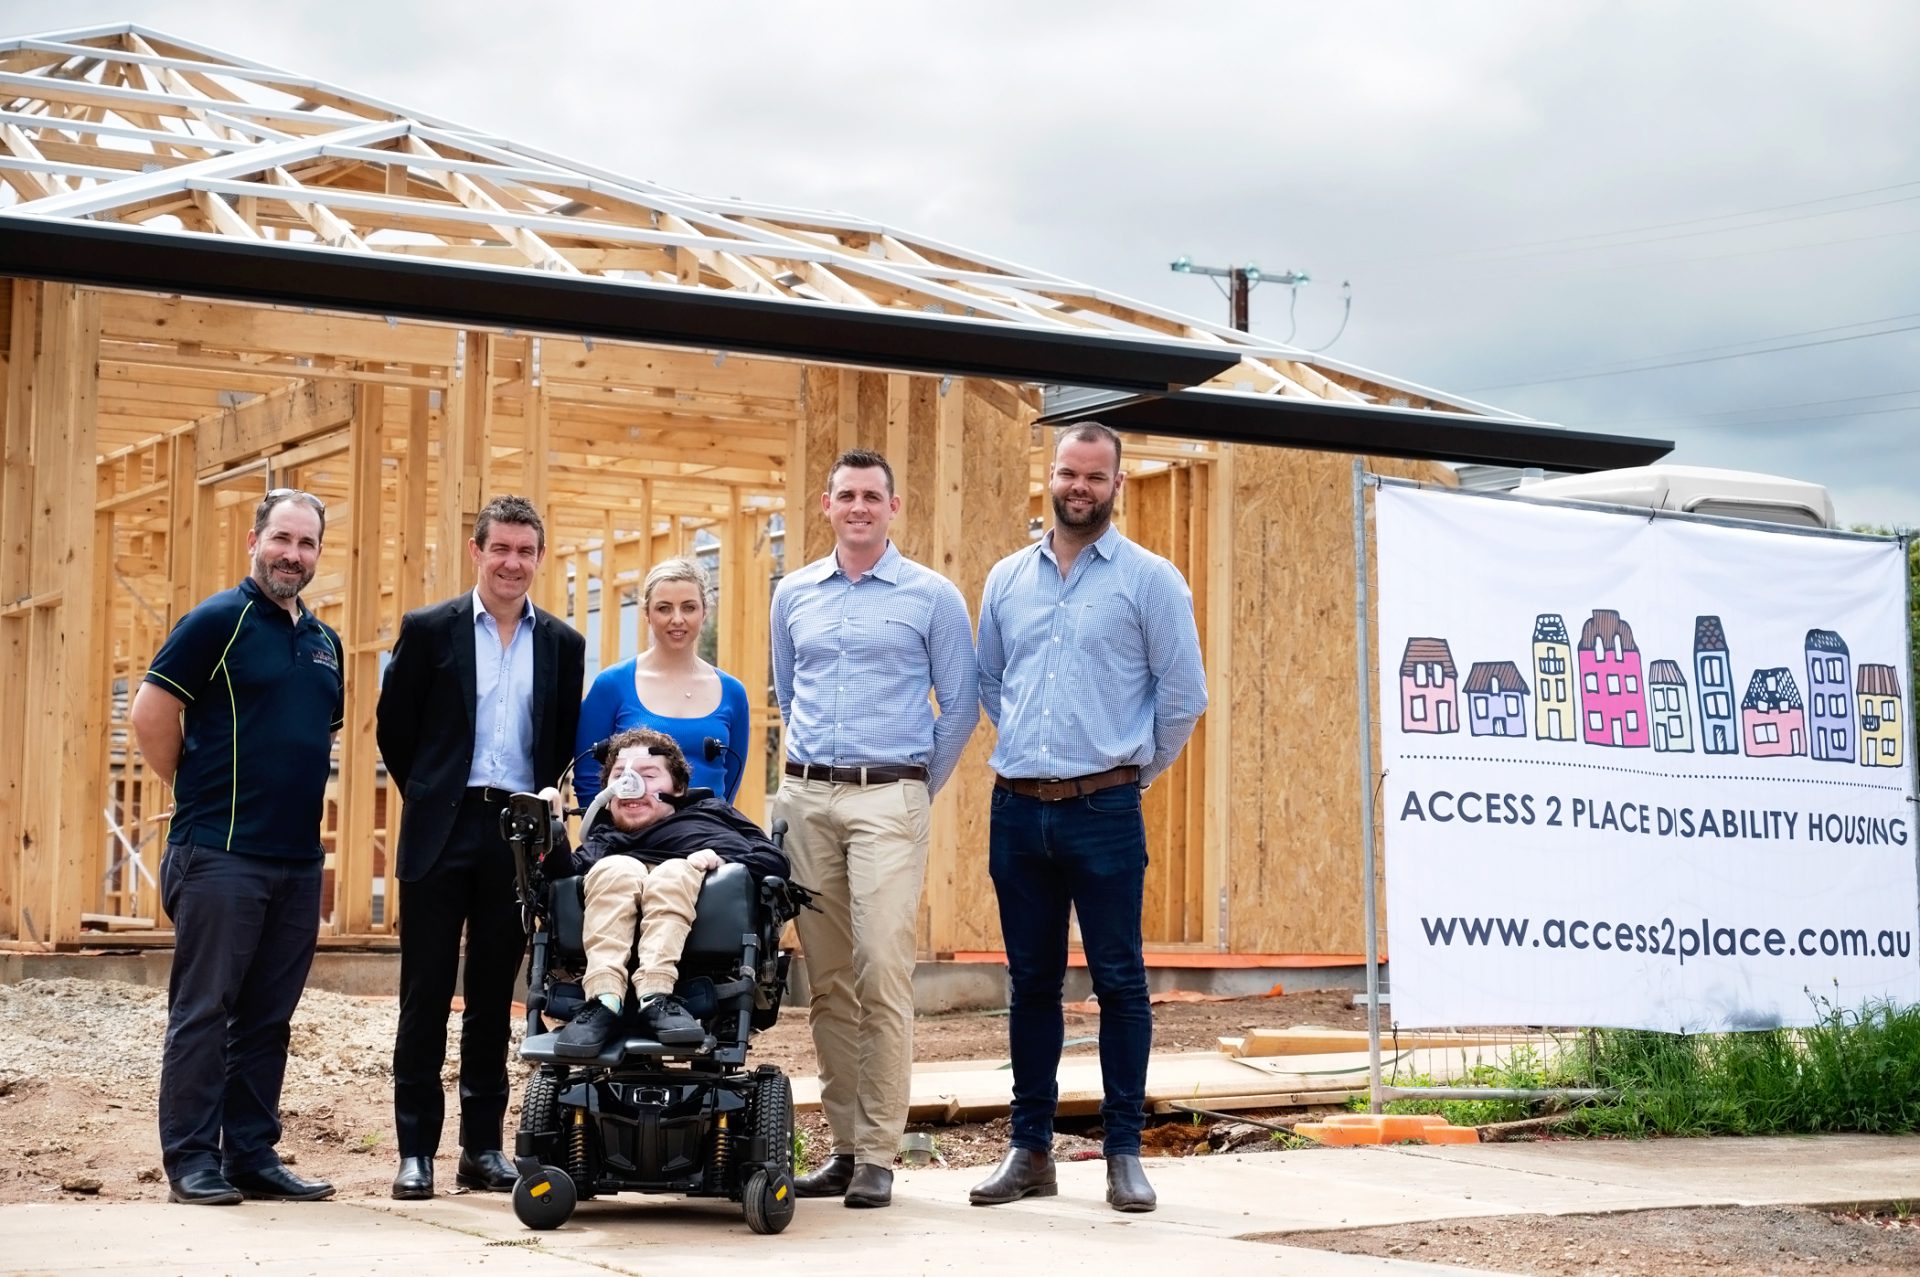 The Access 2 Place team with one of their tenants in front of a new purpose built project.